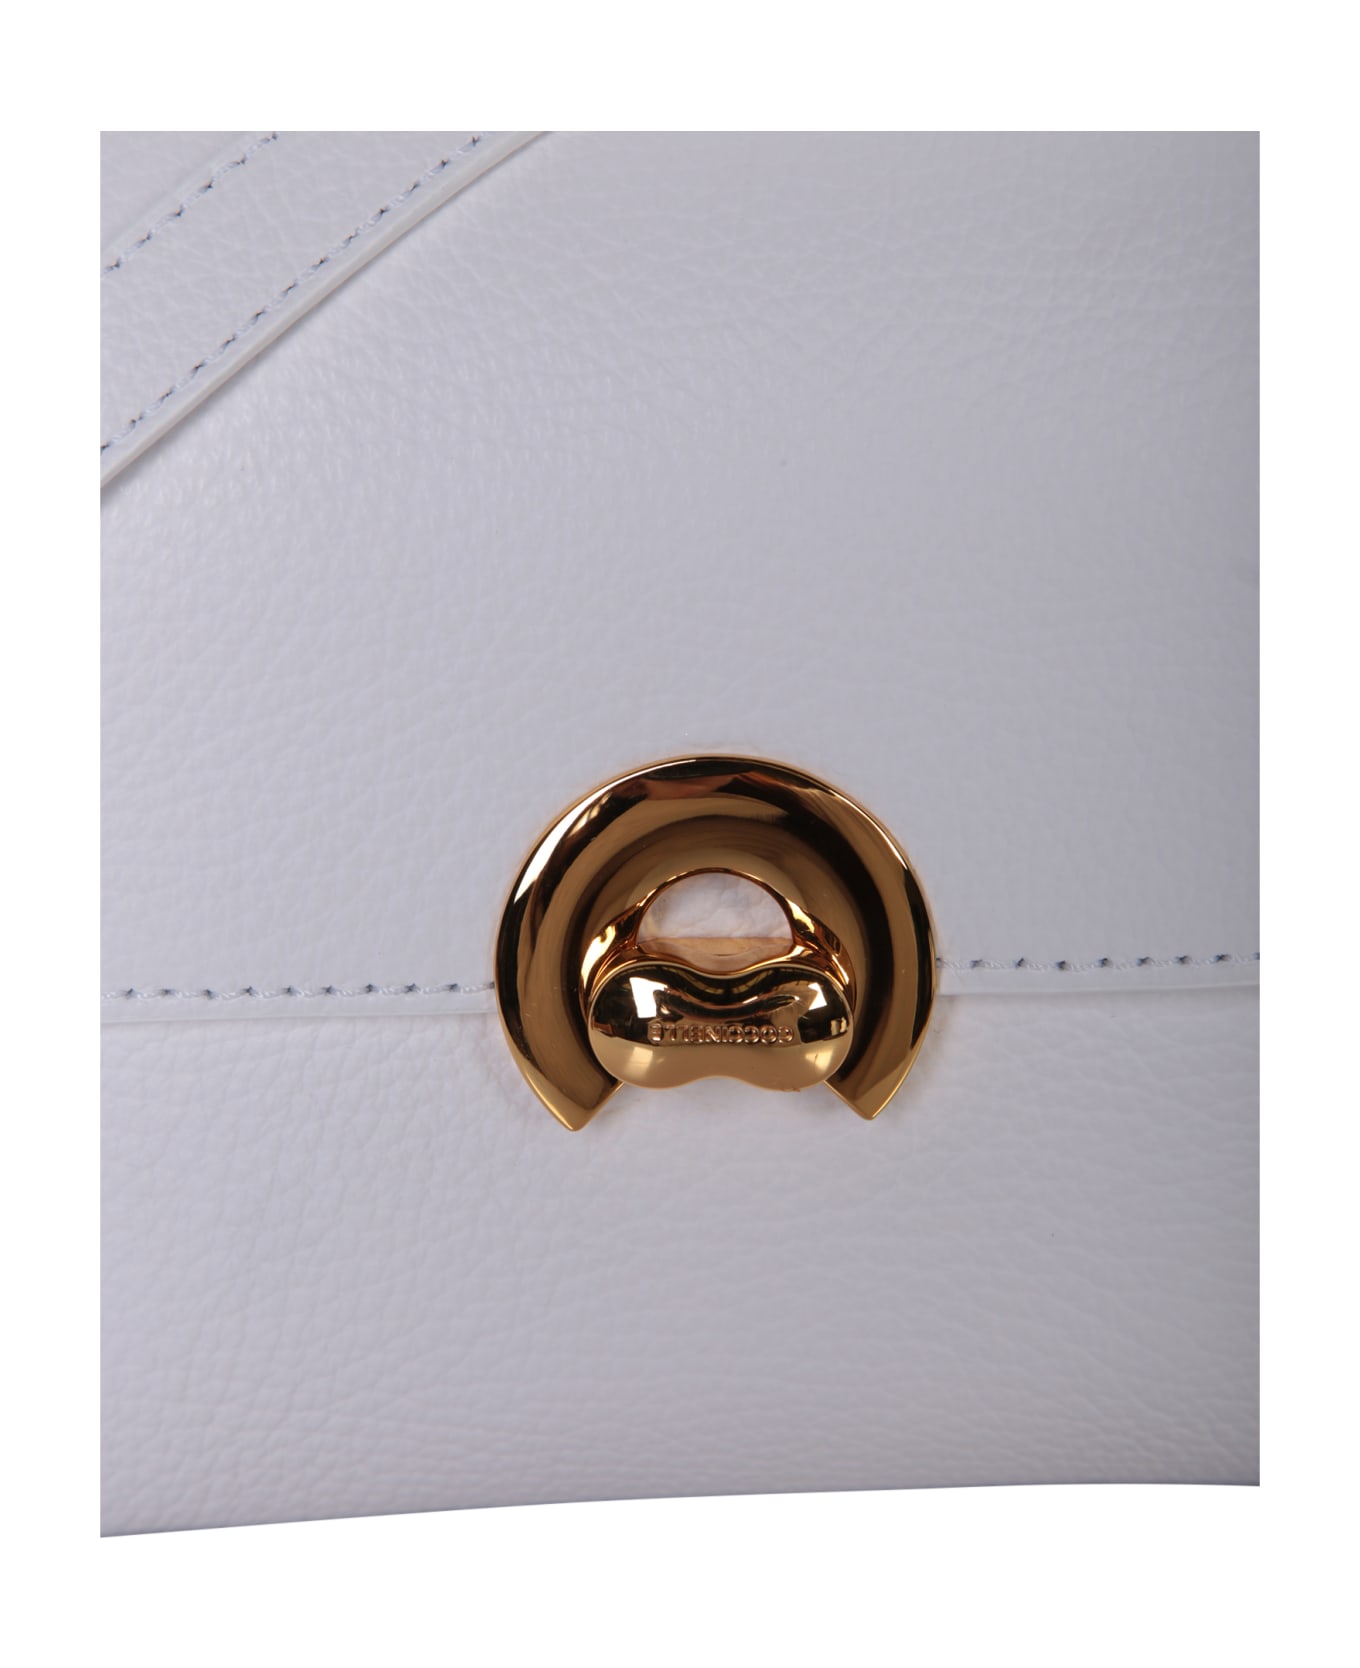 Coccinelle Arlettis Mini Gold And White Bag - Metallic トートバッグ